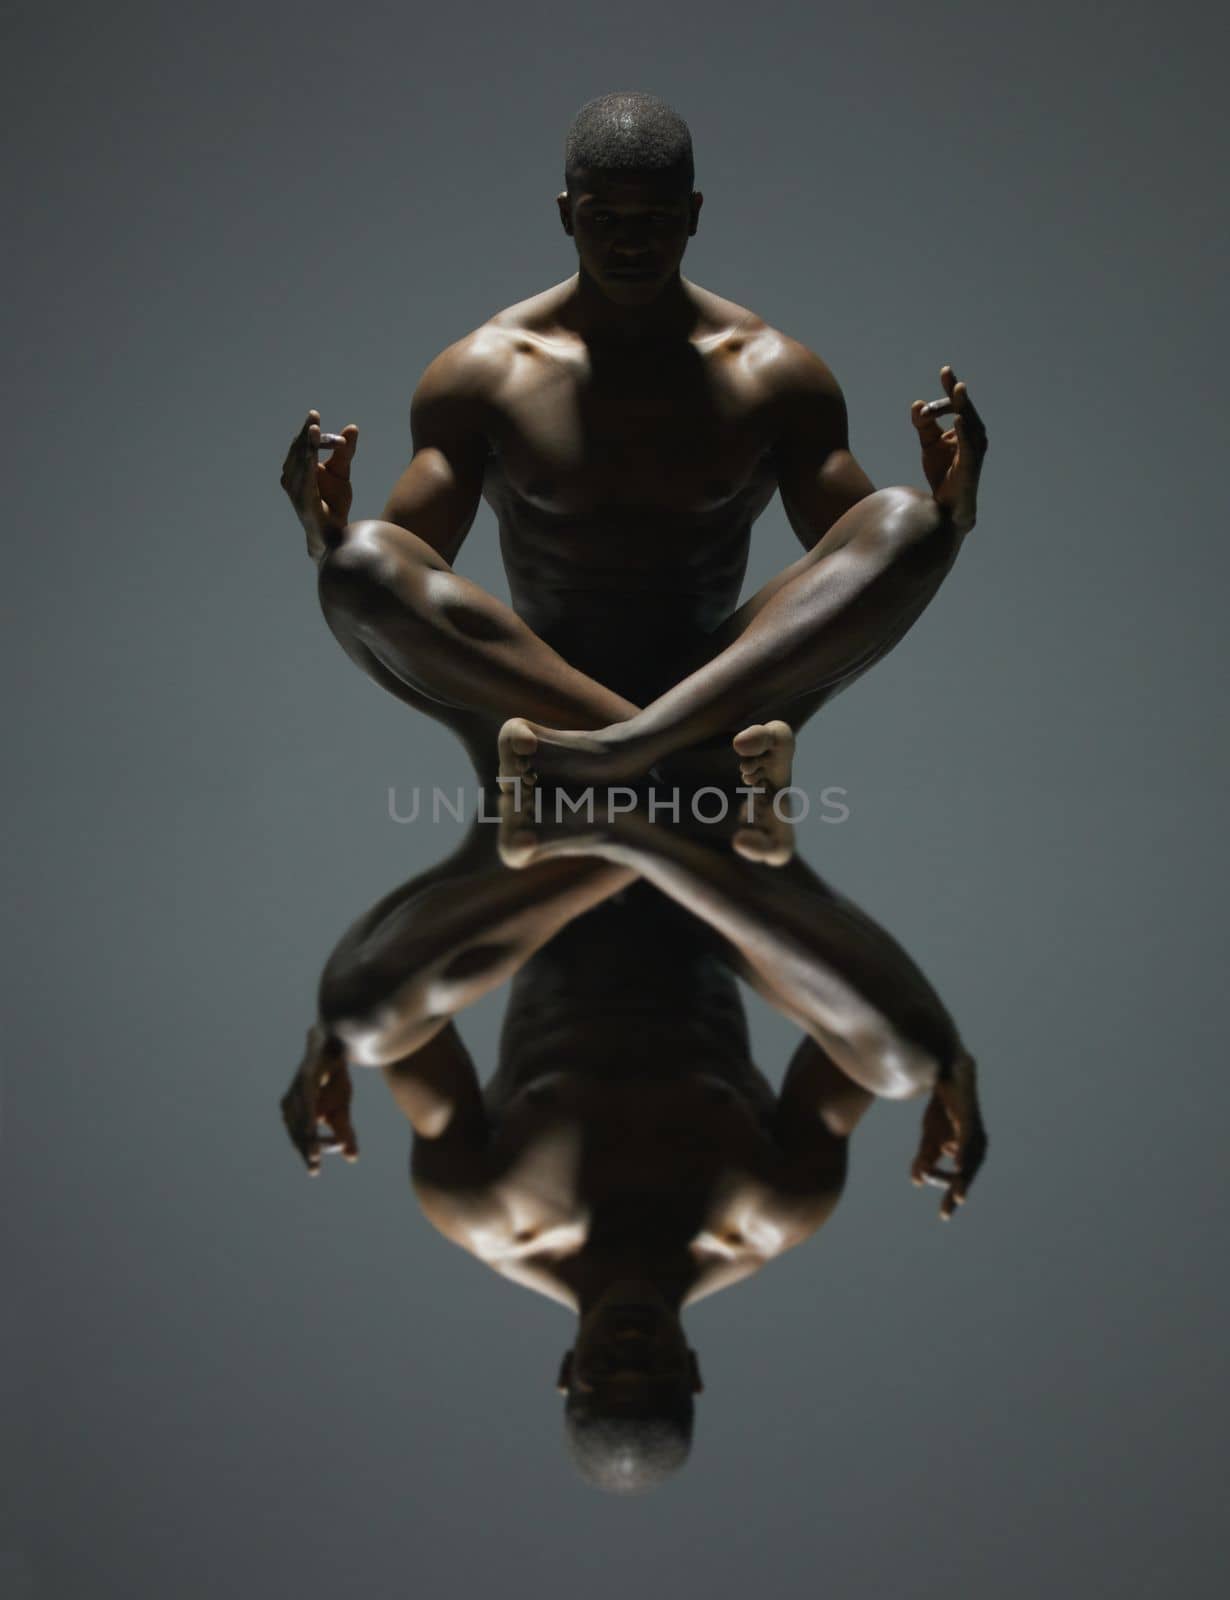 Black man, meditation and mirror reflection on dark background for spiritual wellness or symmetry. Portrait of a naked, nude or bare African American male model sitting and meditating doppelganger by YuriArcurs